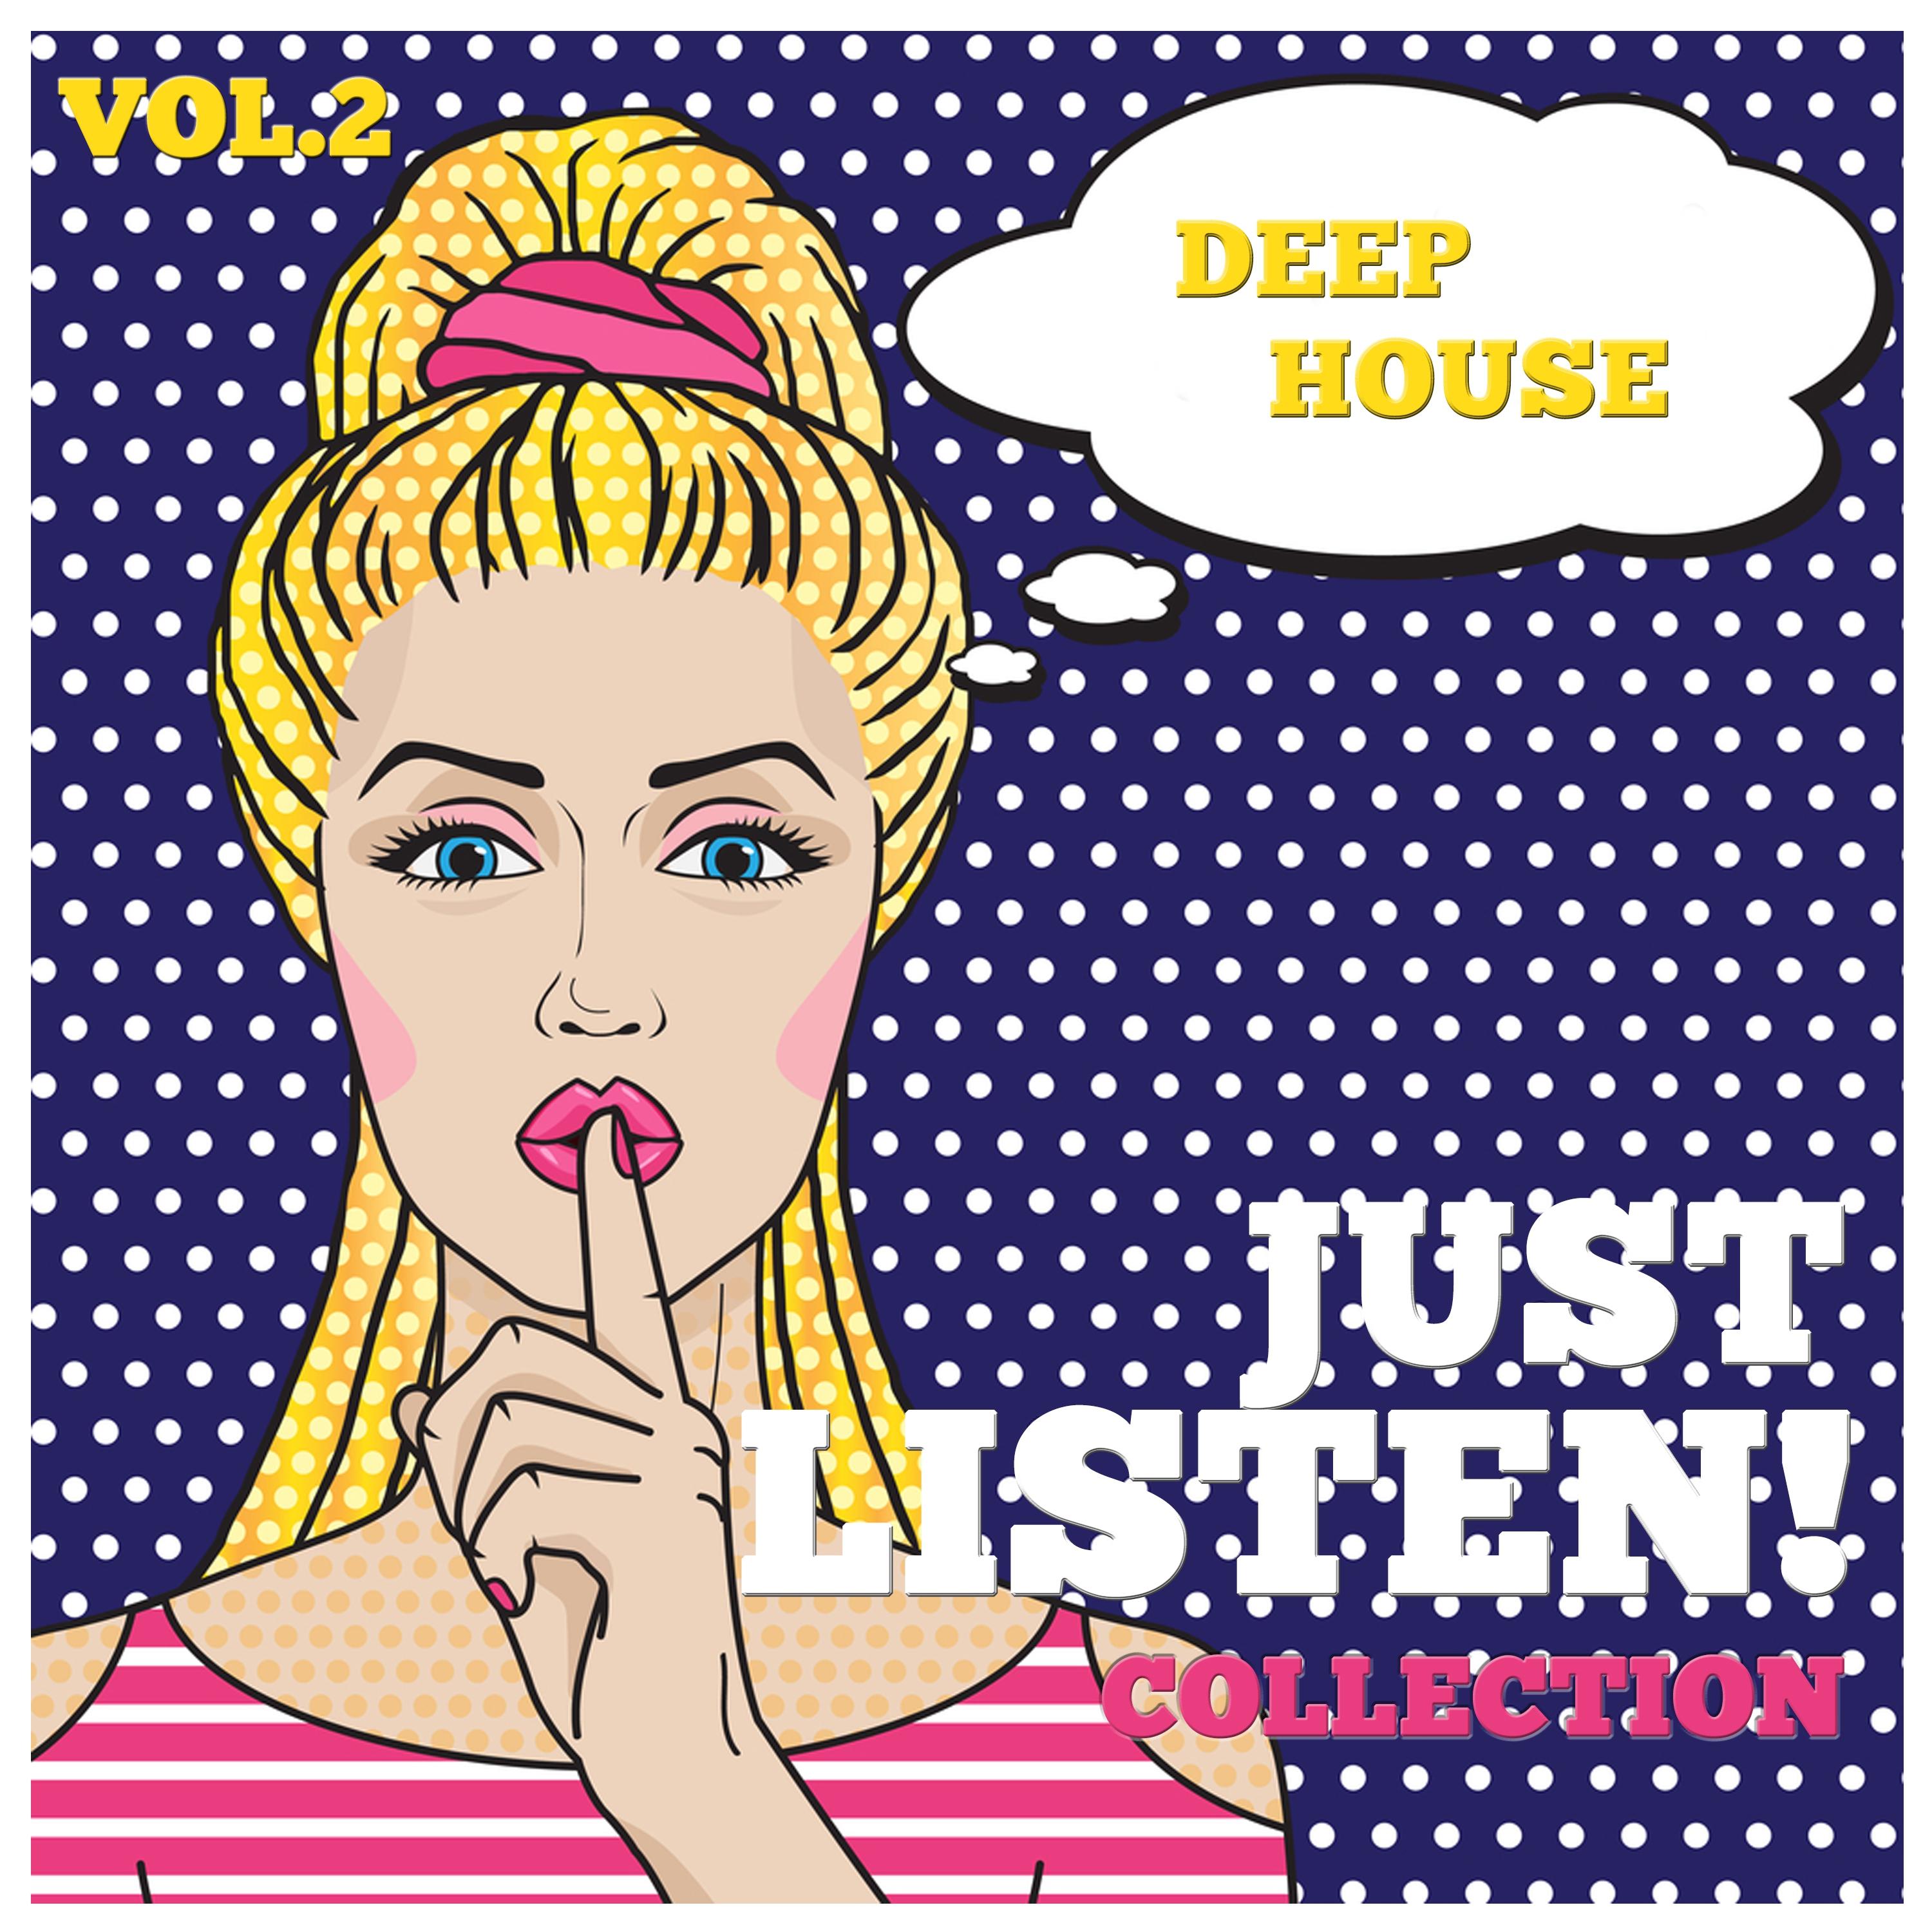 Just Listen! Collection, Vol. 2 - Finest Selection of Deep House